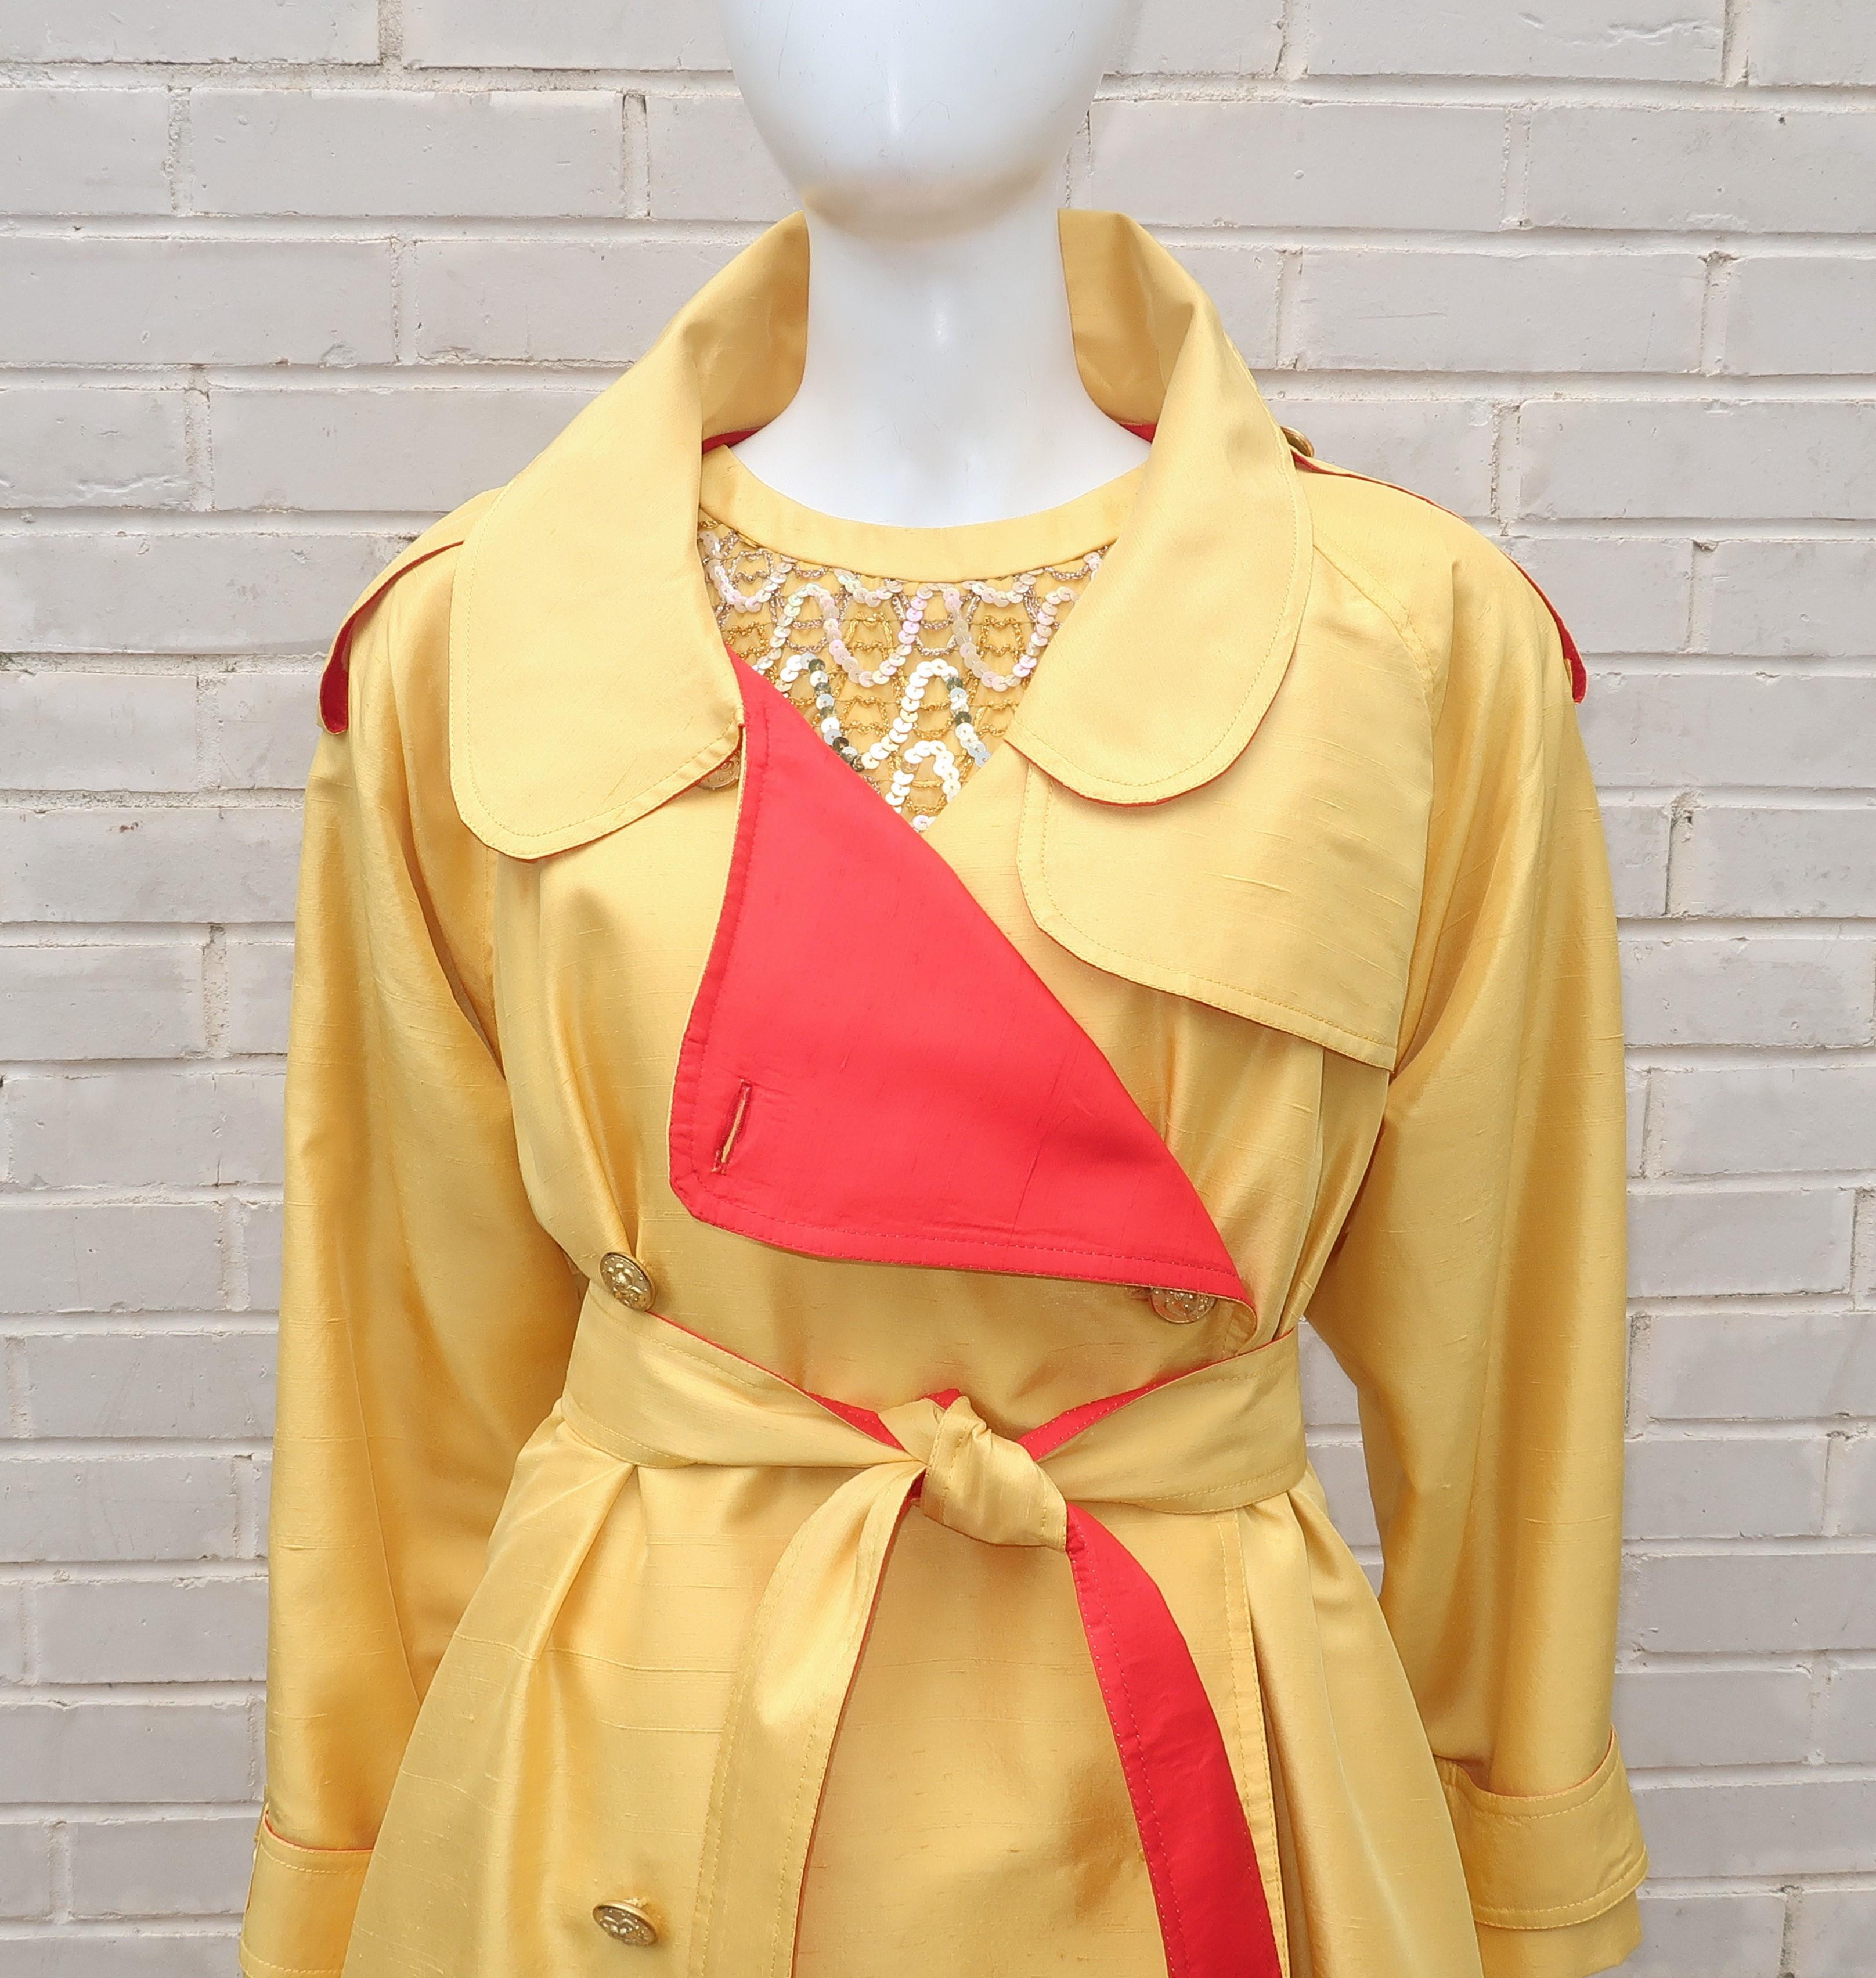 This 1980's cocktail ensemble is channeling the 1960's complete with a sequined mini dress and a coordinating jacket.  Both pieces are designed with a bright yellow and a cardinal red silk shantung fabrics.  The dress is embellished with golden